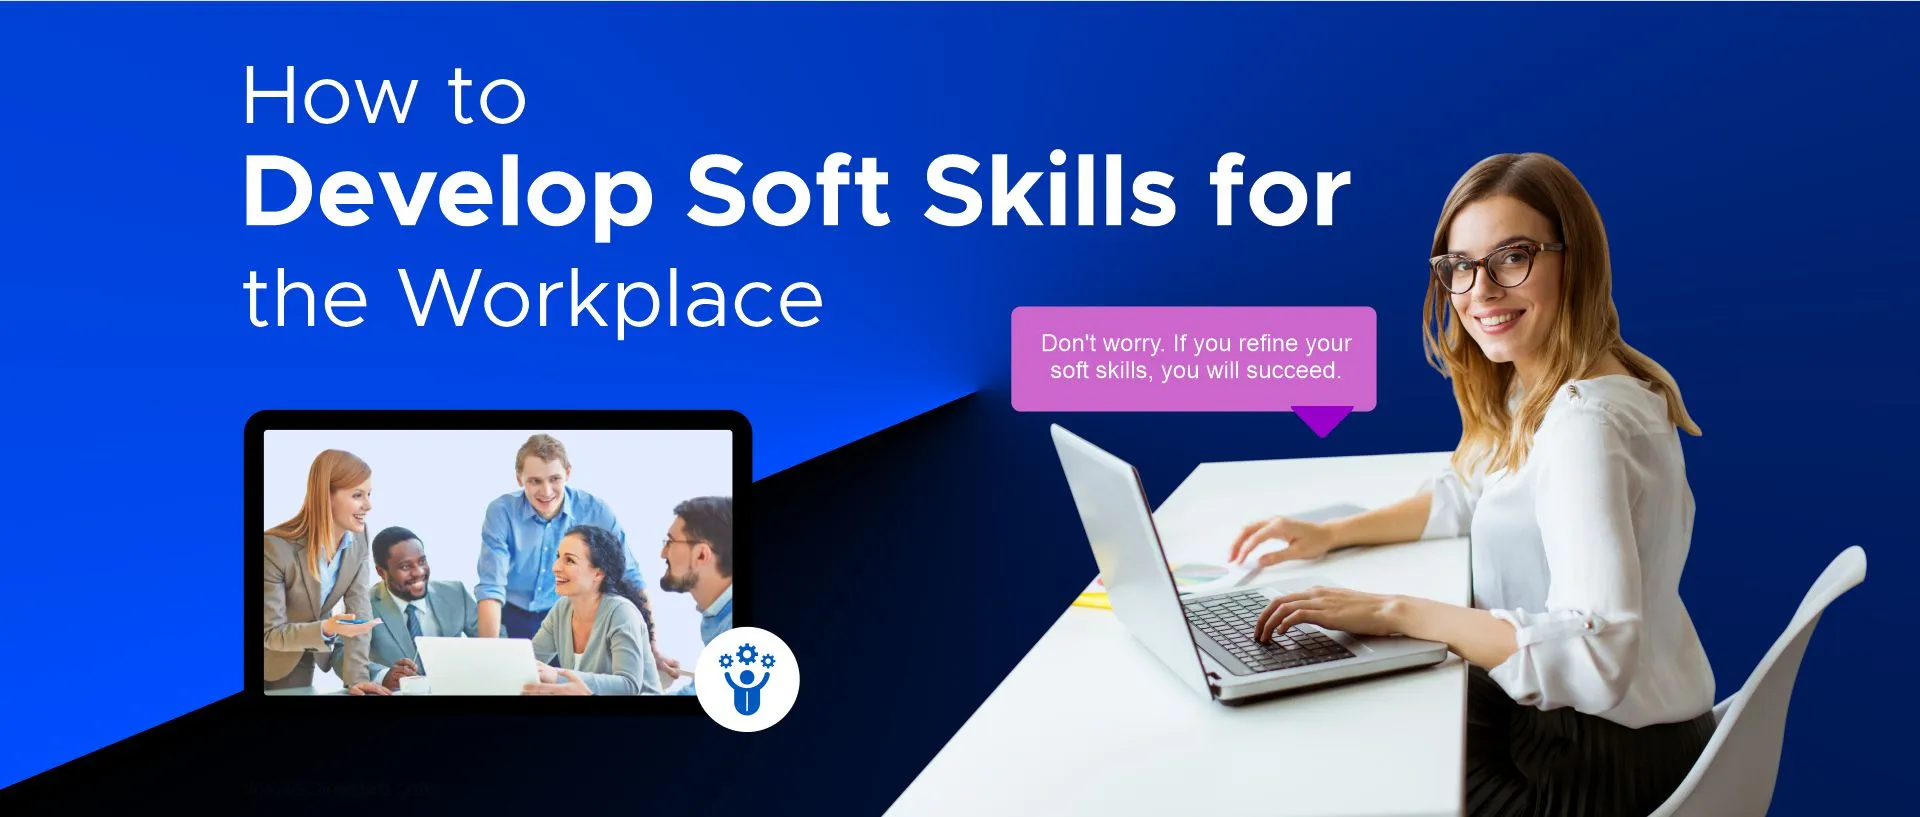 How to Develop Soft Skills for the Workplace